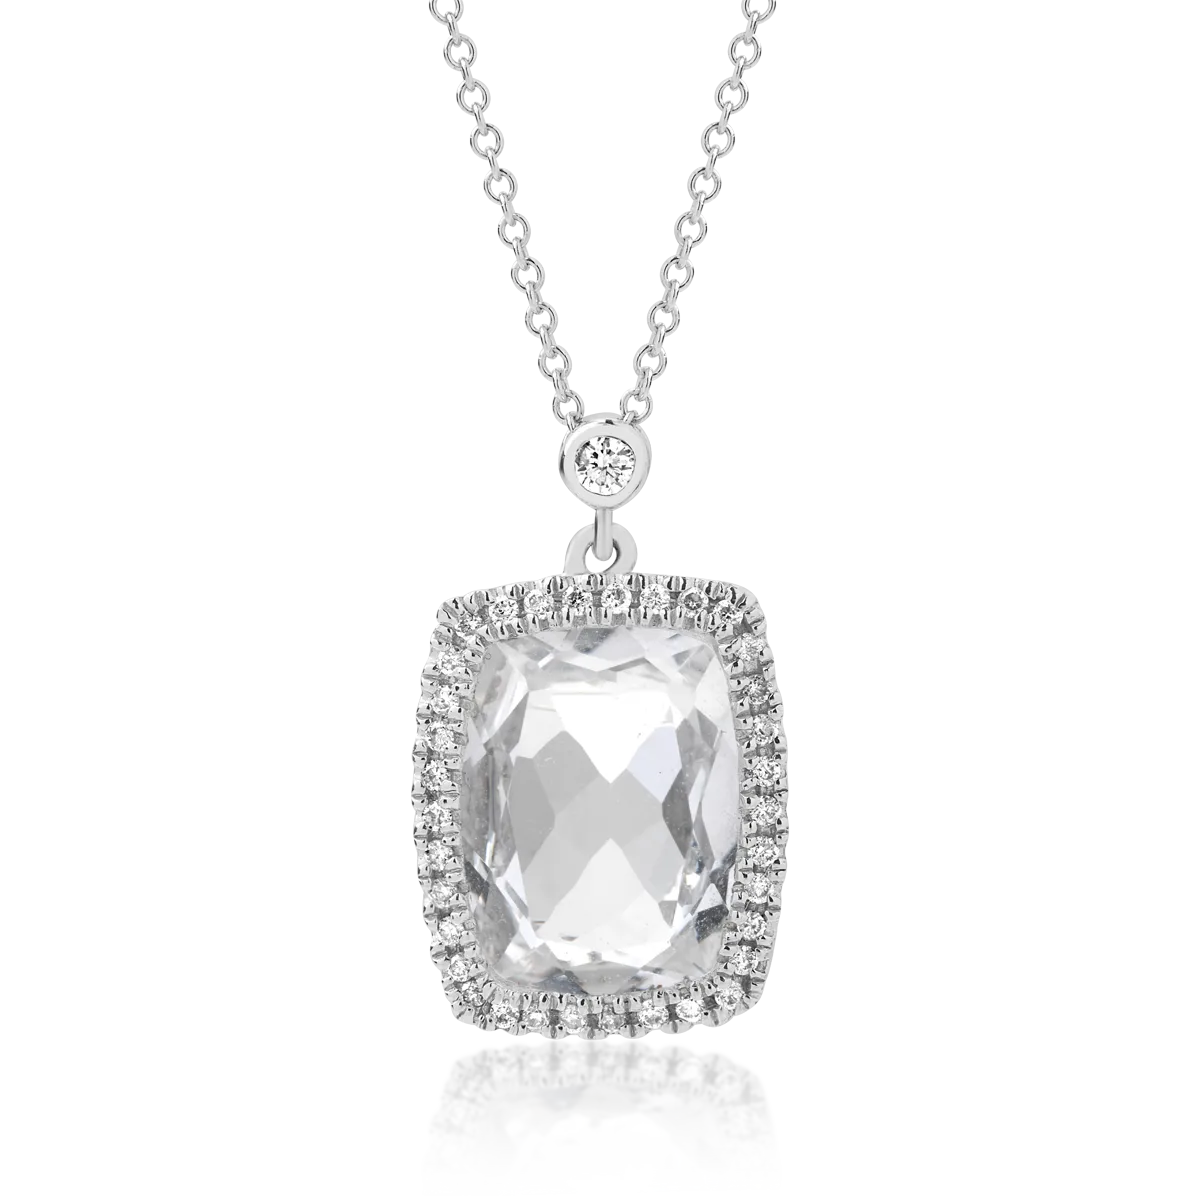 18K white gold pendant necklace with 4.51ct white topaz and 0.19ct diamonds